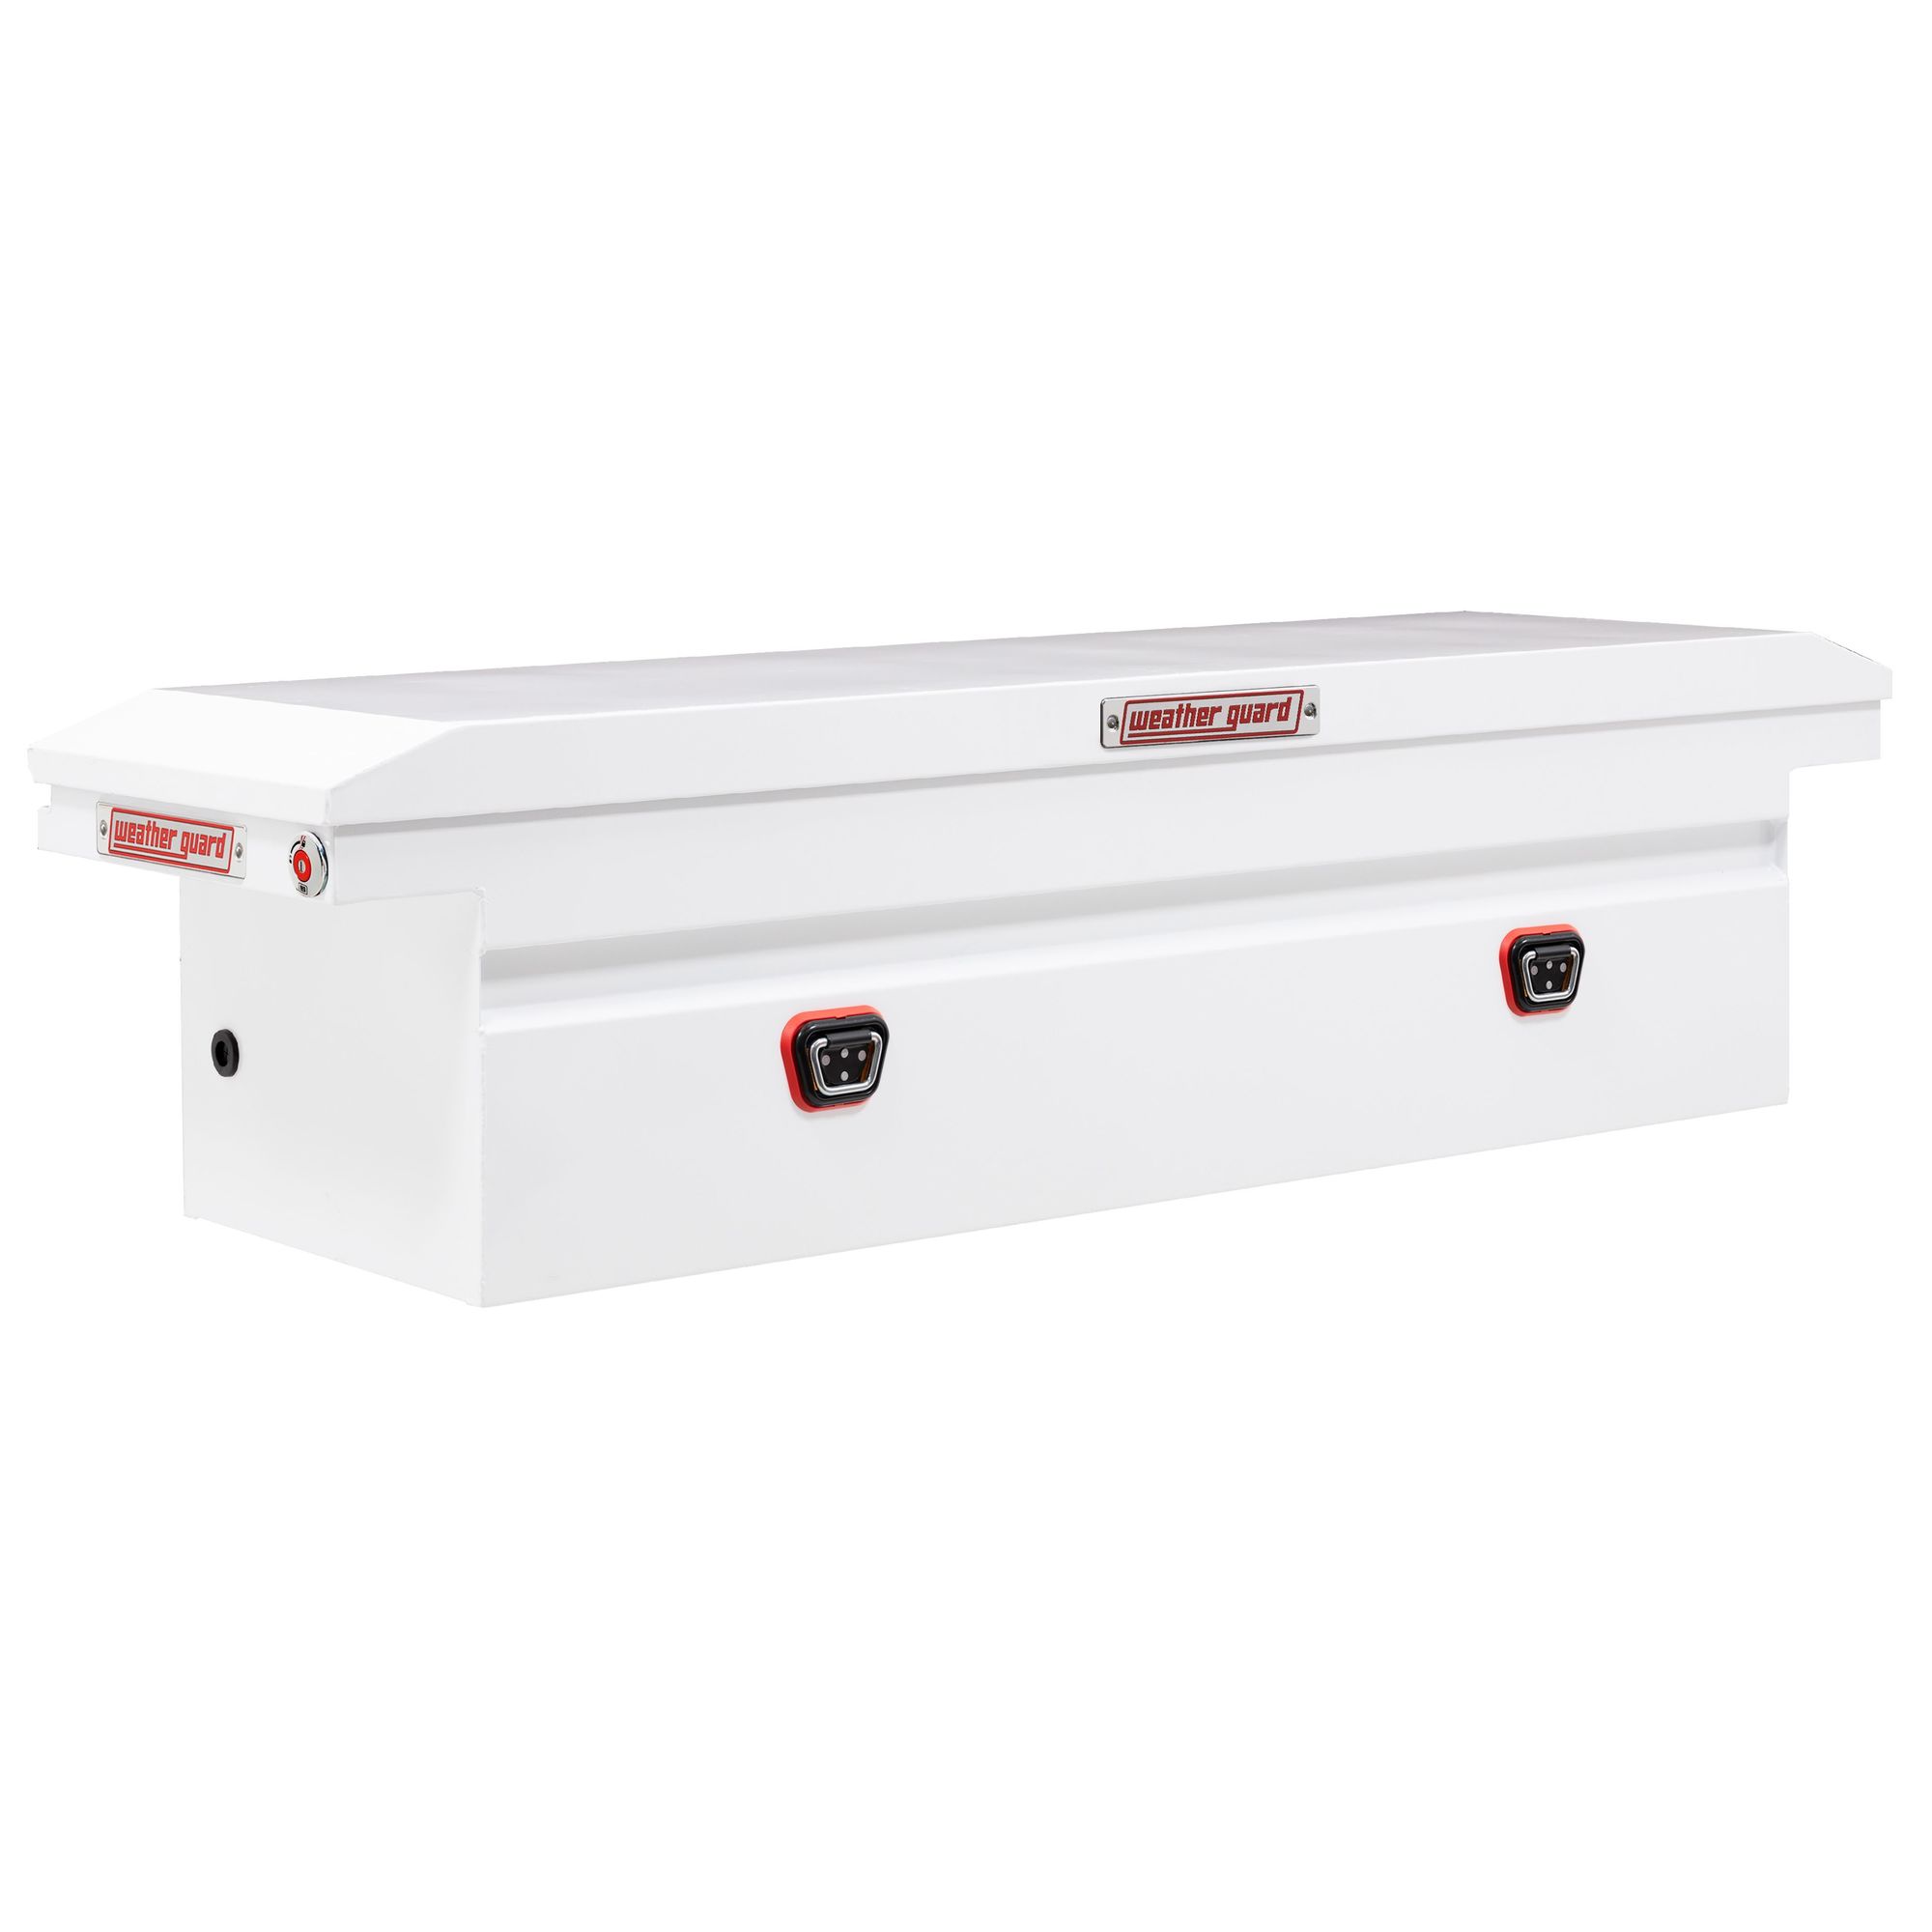 Weather Guard, 71Inch Saddle Box, Steel, Full Low Profile, White, Width 72 in, Material Steel, Color Finish Glossy White, Model 120-3-04